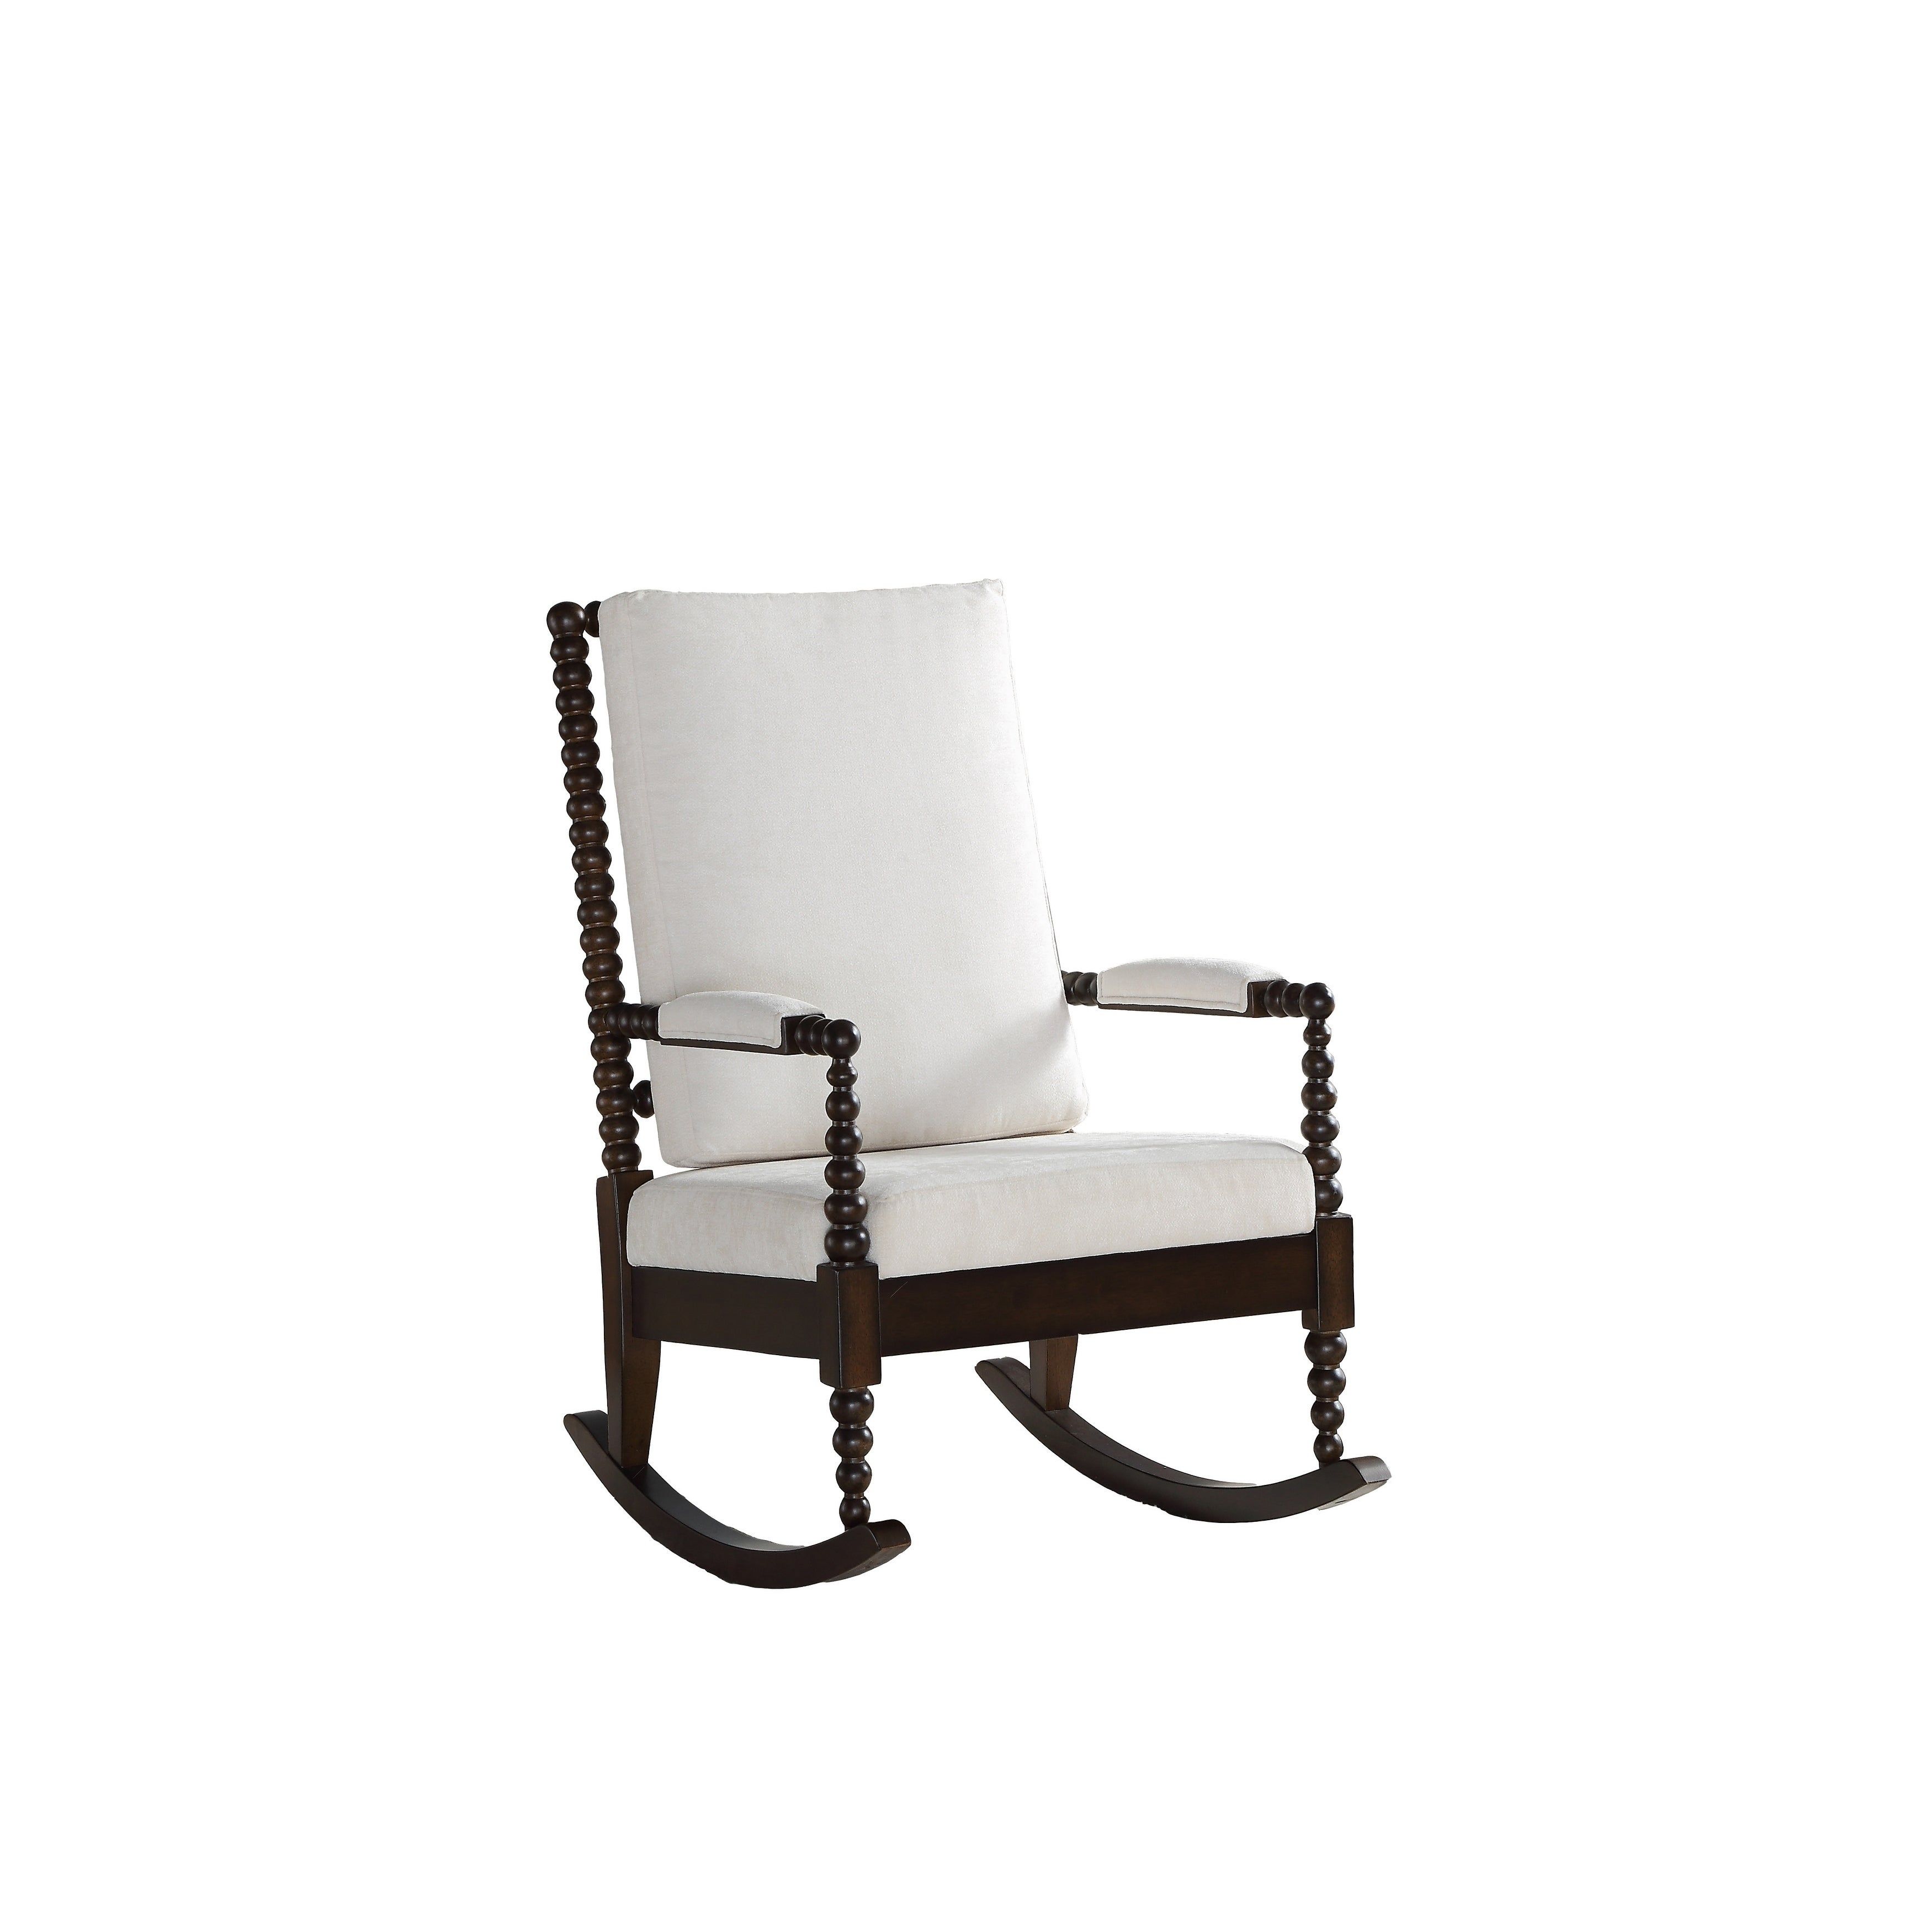 Copper Grove Drnis Rocking Chair With Cream Fabric And Walnut Wood Frame Pertaining To Rocking Chairs In Cream Fabric And White (View 4 of 20)